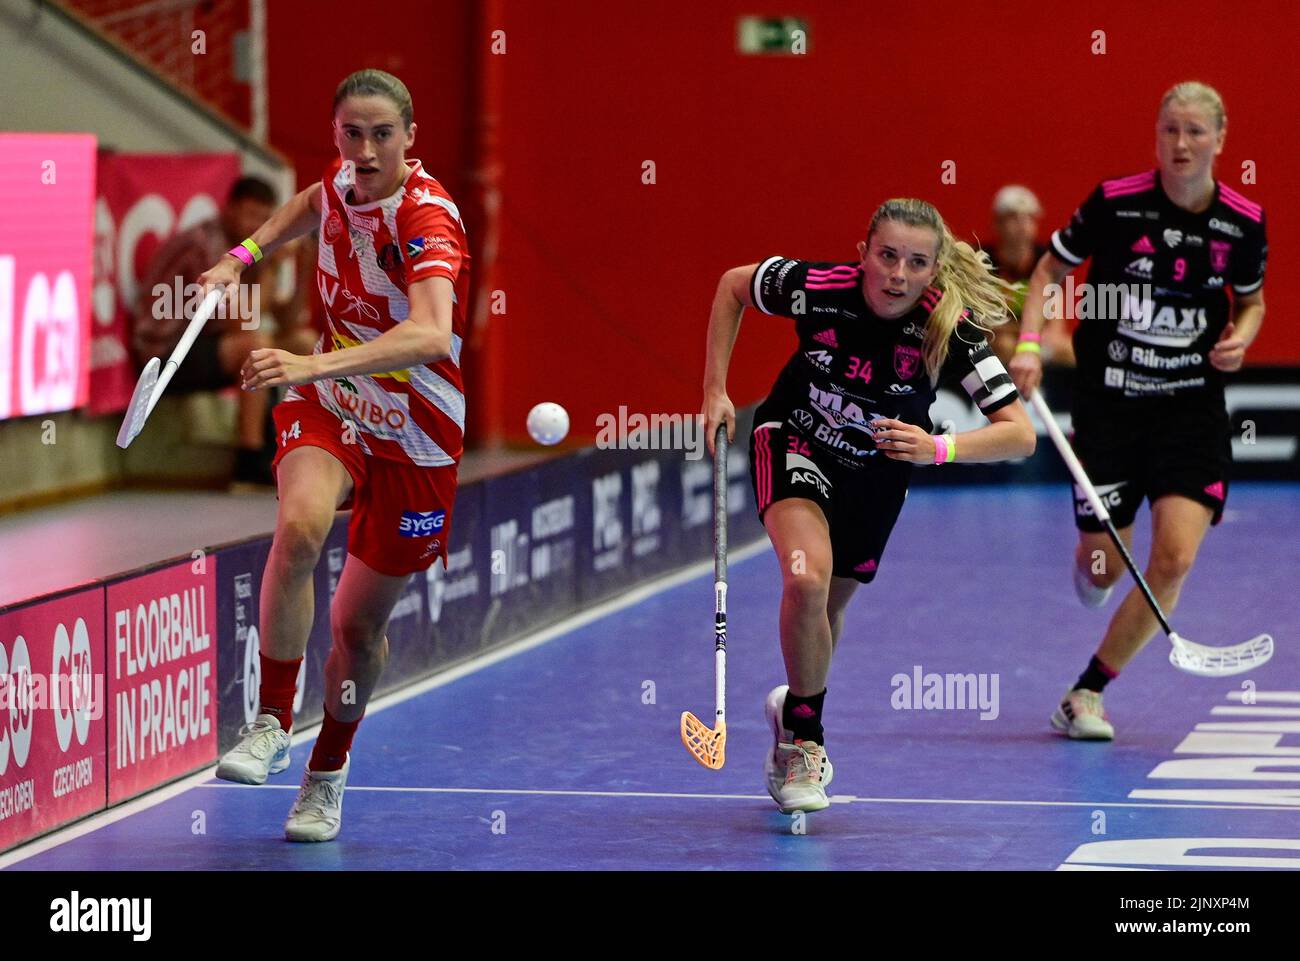 Prague, Czech Republic. 14th Aug, 2022. From left Klara Loneberg of Pixbo and Moa Gustafsson of Falun in action during the Czech Open, biggest international floorball tournament in Prague, Czech Republic, August 14, 2022. (CTK PHOTO/Roman Vondrous) Stock Photo